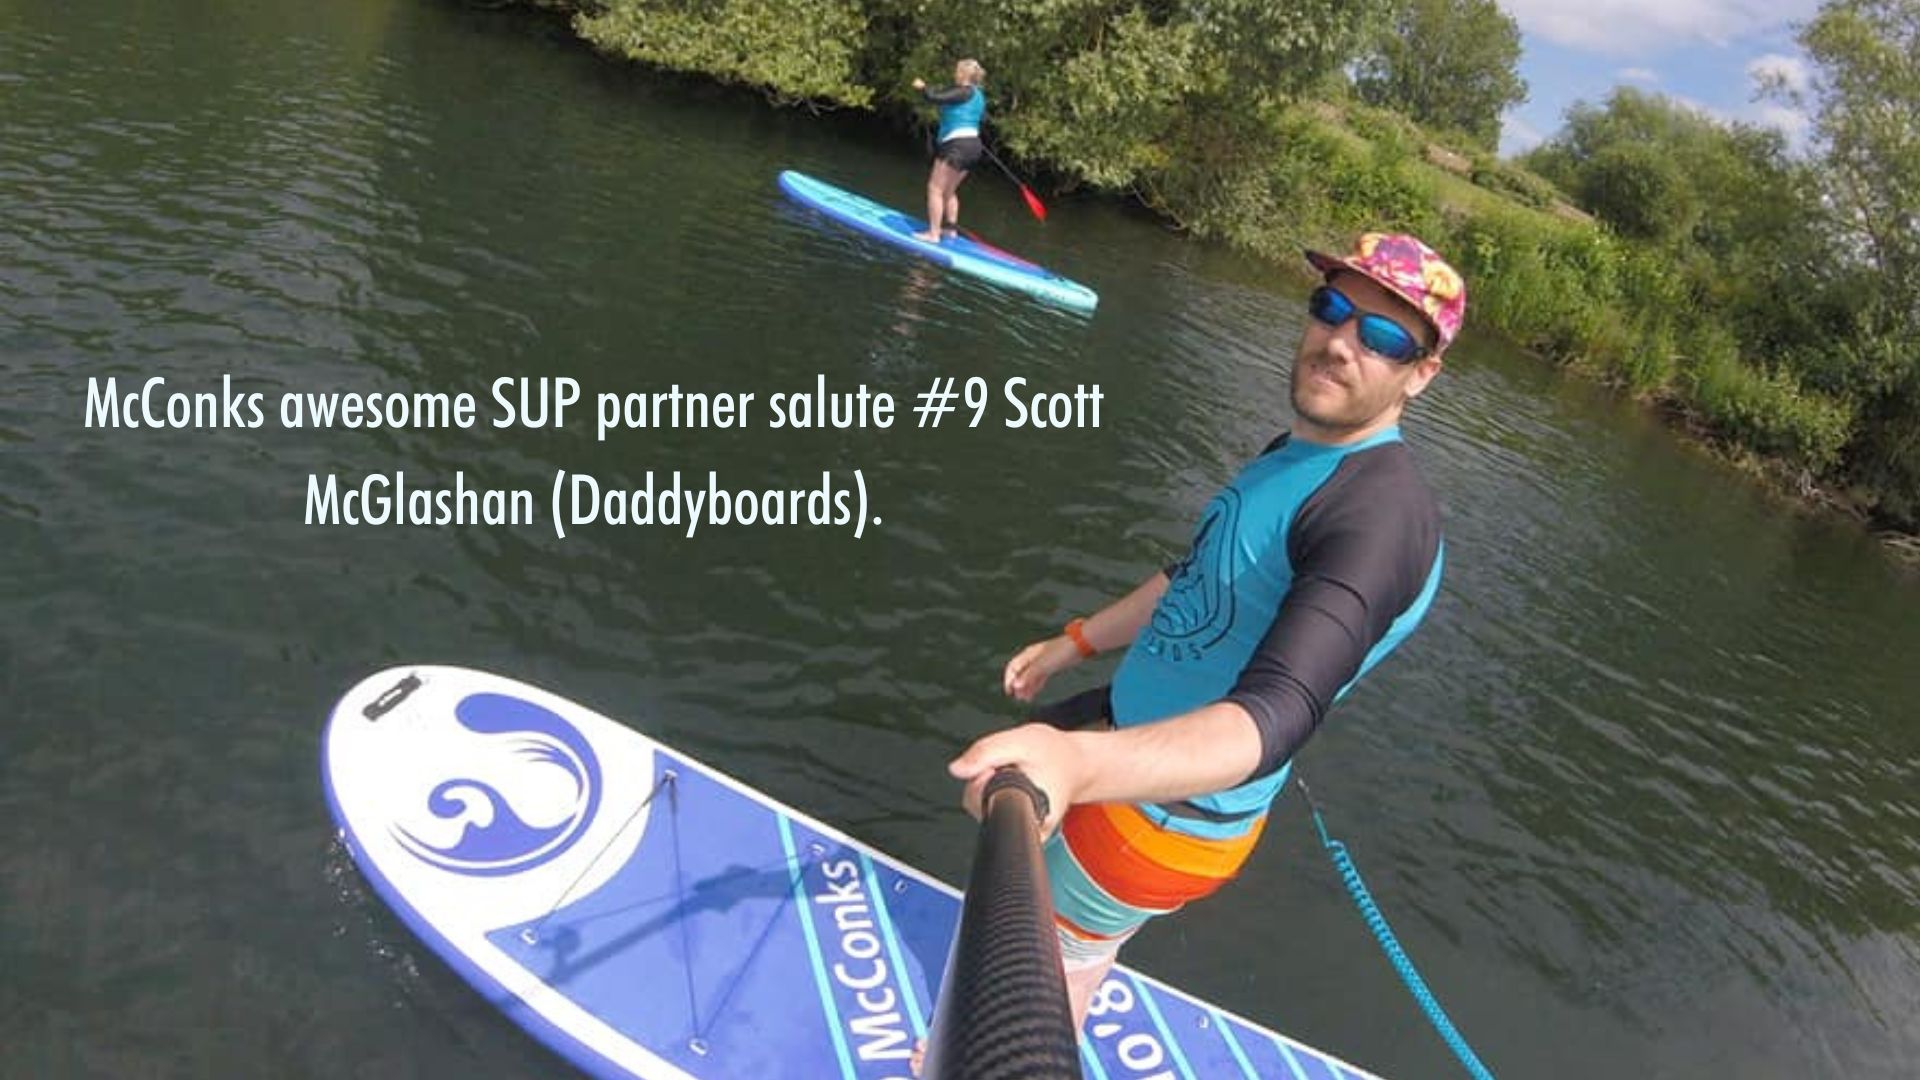 You are currently viewing McConks awesome SUP partner salute #9 Scott McGlashan (Daddyboards).